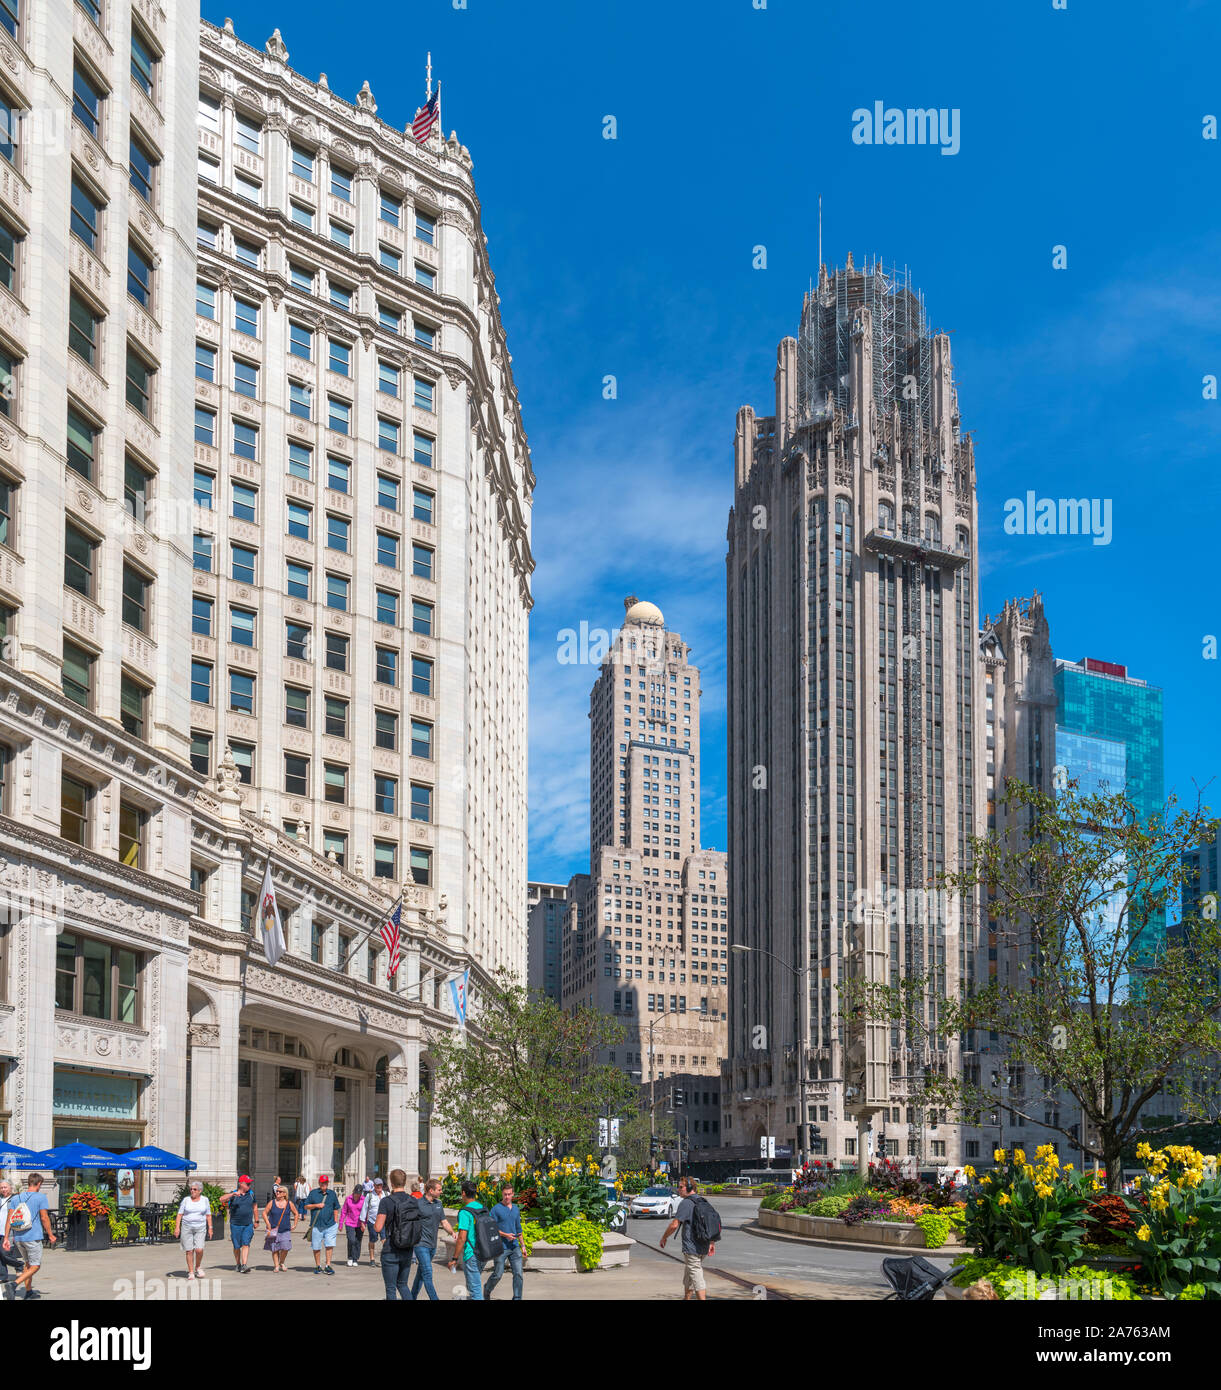 The start of the Magnificent Mile outside the Wrigley Building and looking towards the Tribune Tower, N Michigan Avenue, Chicago, Illinois, USA Stock Photo